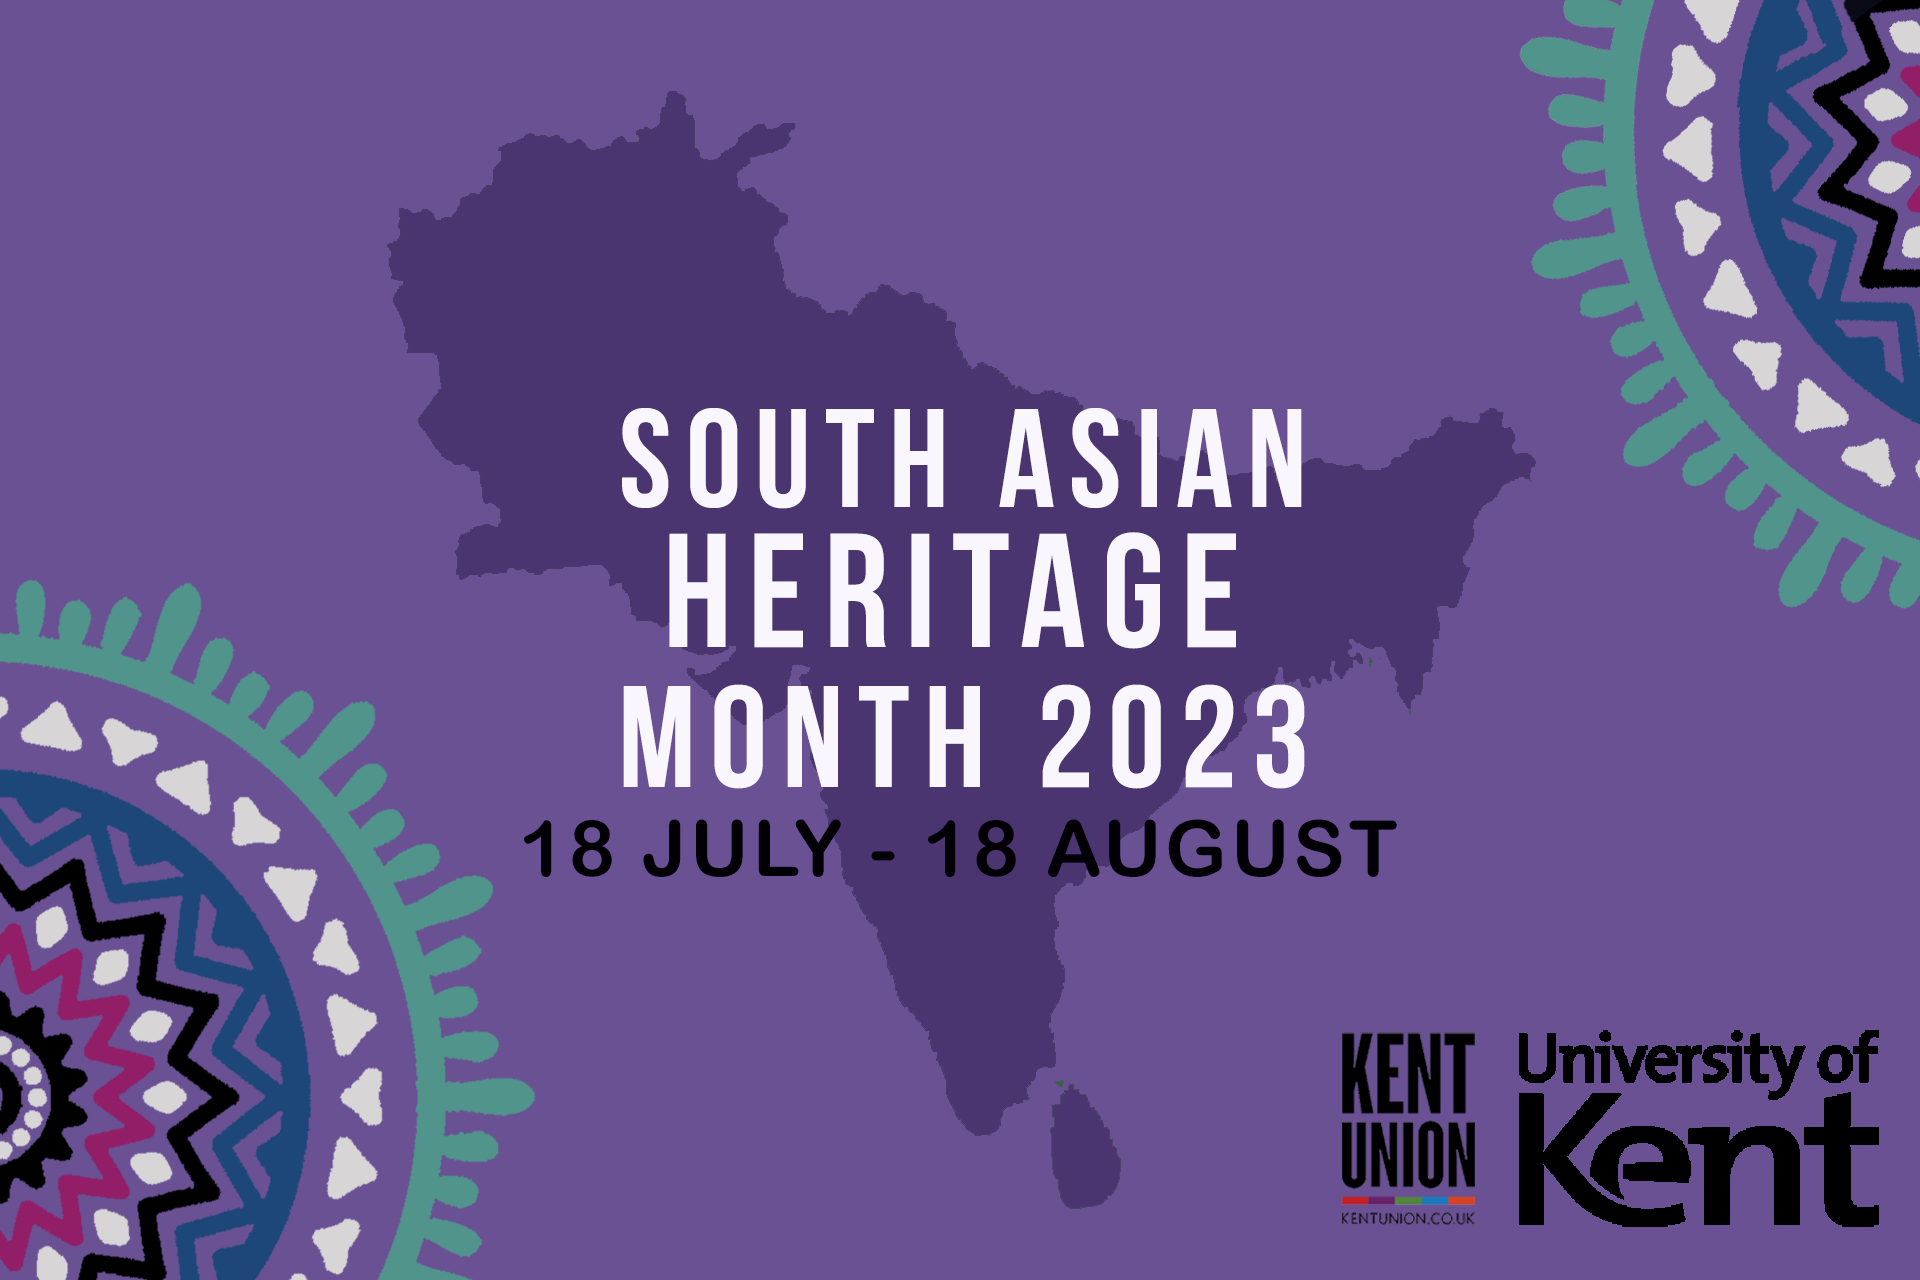 Banner for South Asian Heritage Month, Uni of Kent and Student Union logos, map of South Asia as background, text reads: "South Asian Heritage Month 2023, 18 July - 17 August'